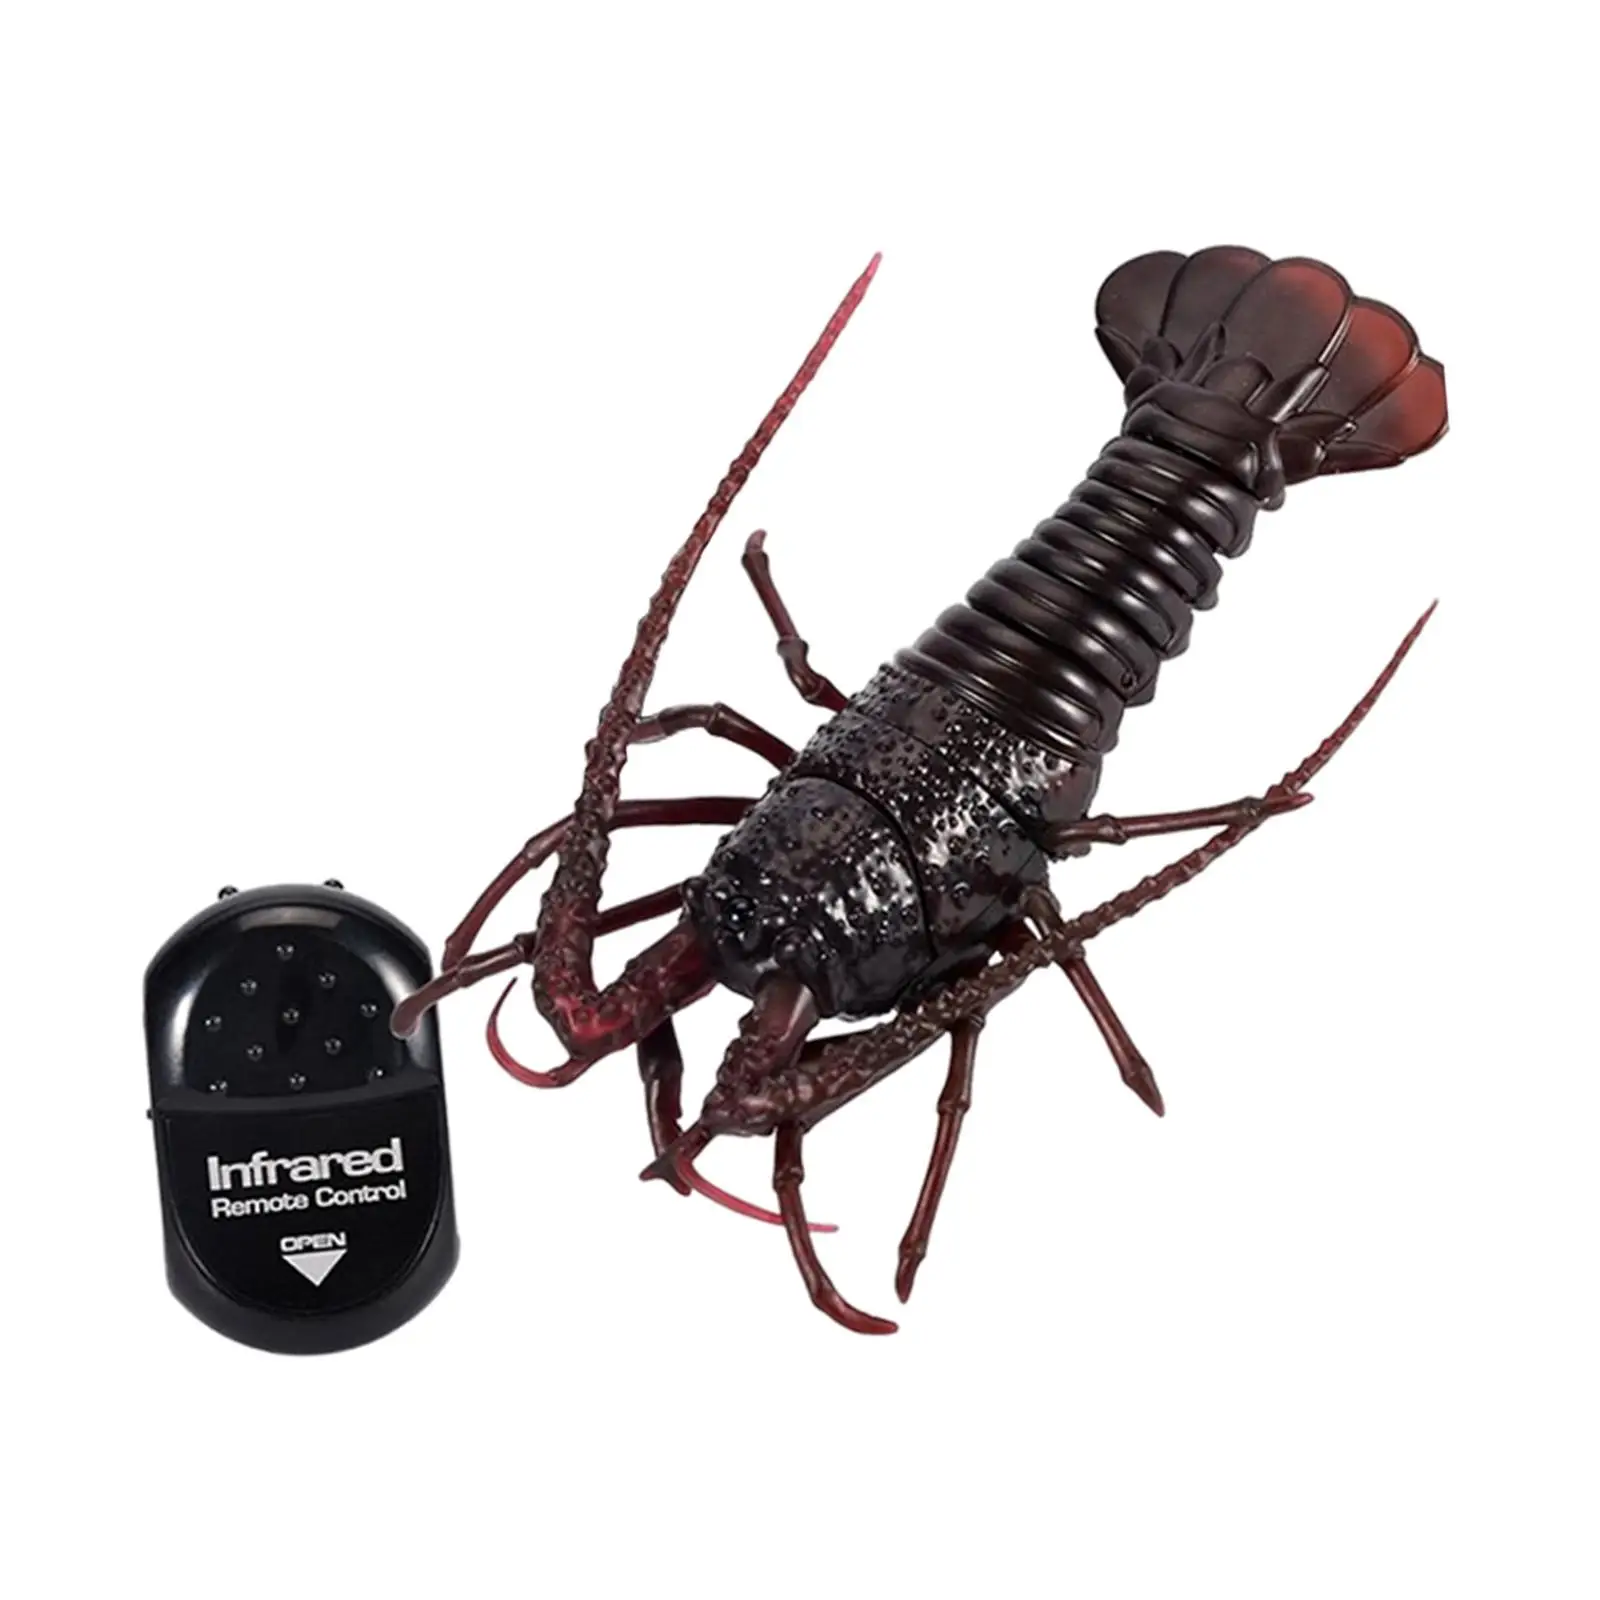 Electric Infrared RC Shrimp Remote Control Crawfish Toy for Girls Boys Gifts